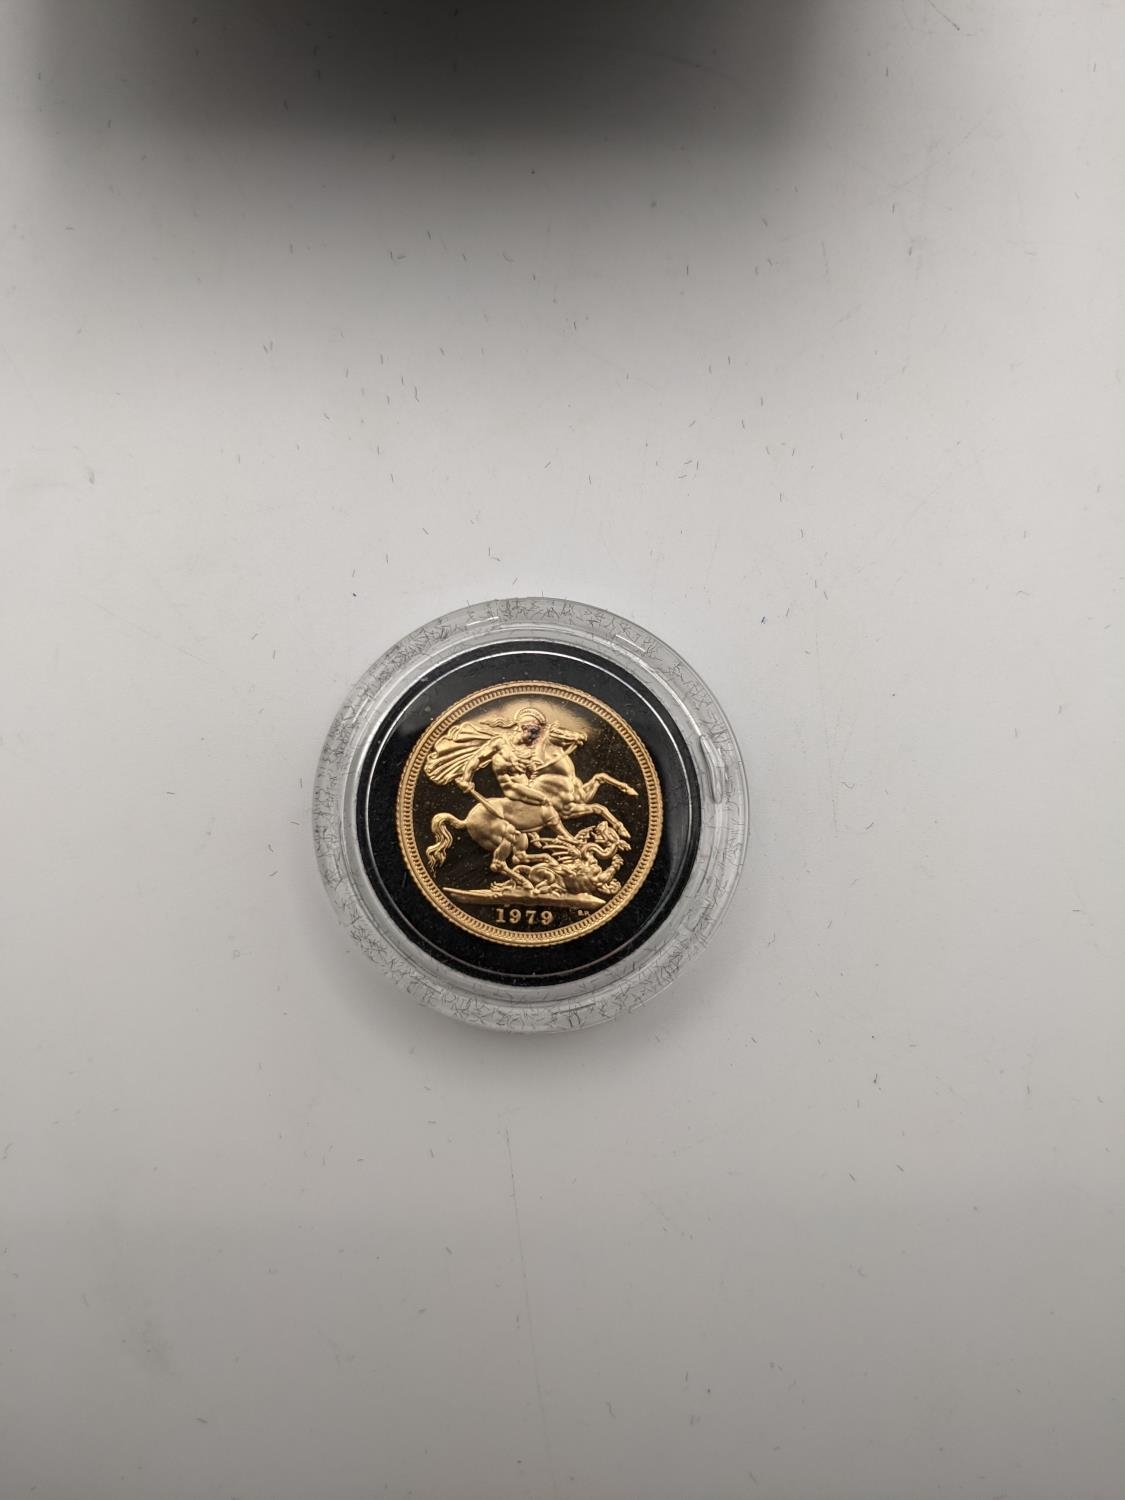 United Kingdom - Elizabeth II Proof Sovereign dated 1979, with box Location: - Image 3 of 3